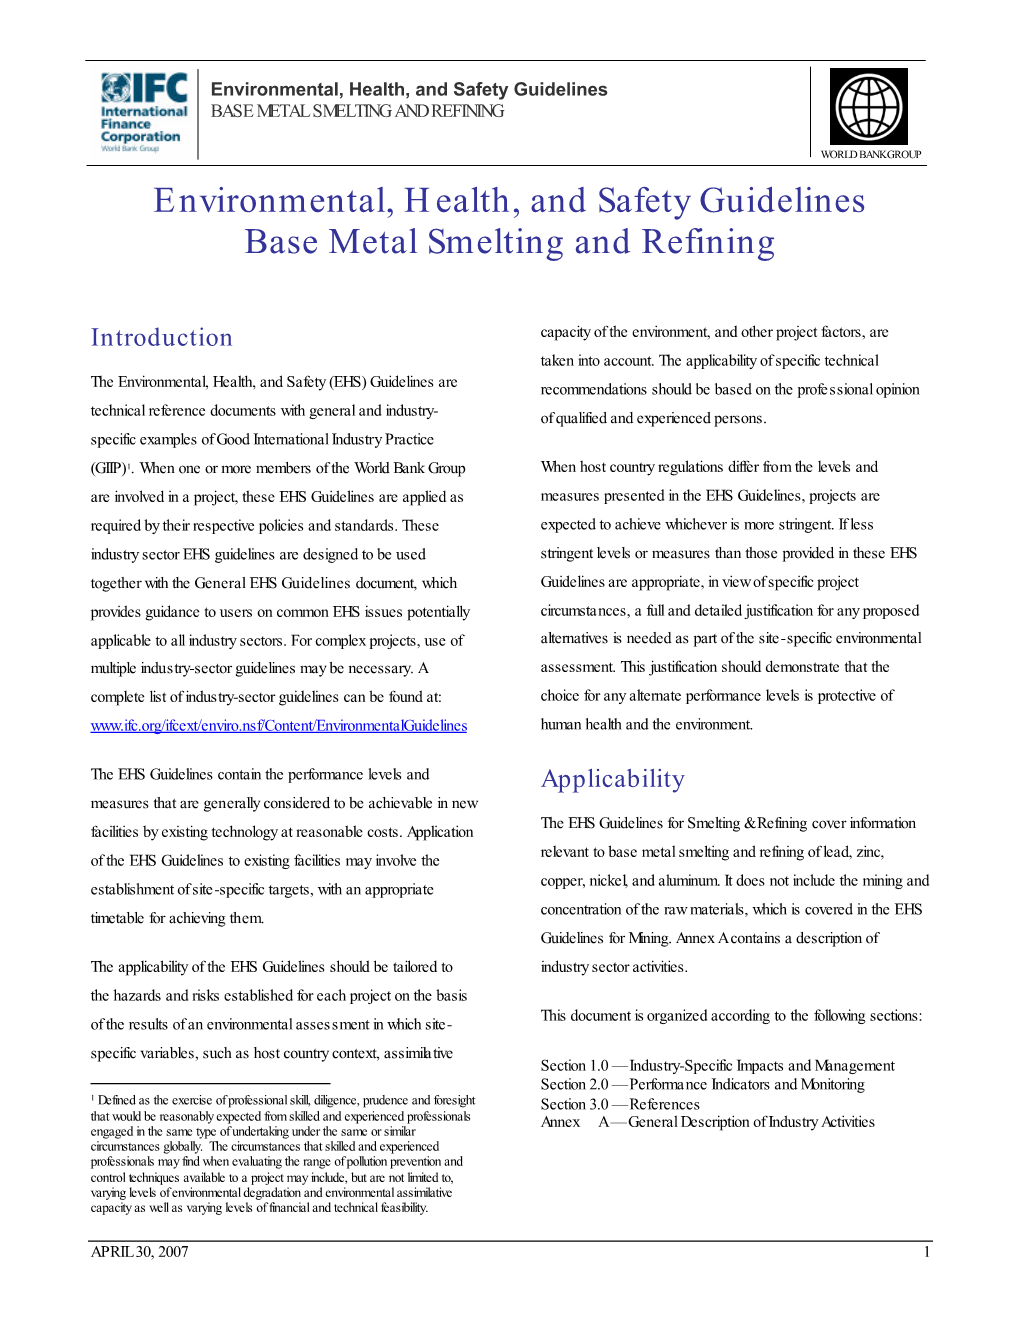 Environmental, Health, and Safety Guidelines BASE METAL SMELTING and REFINING